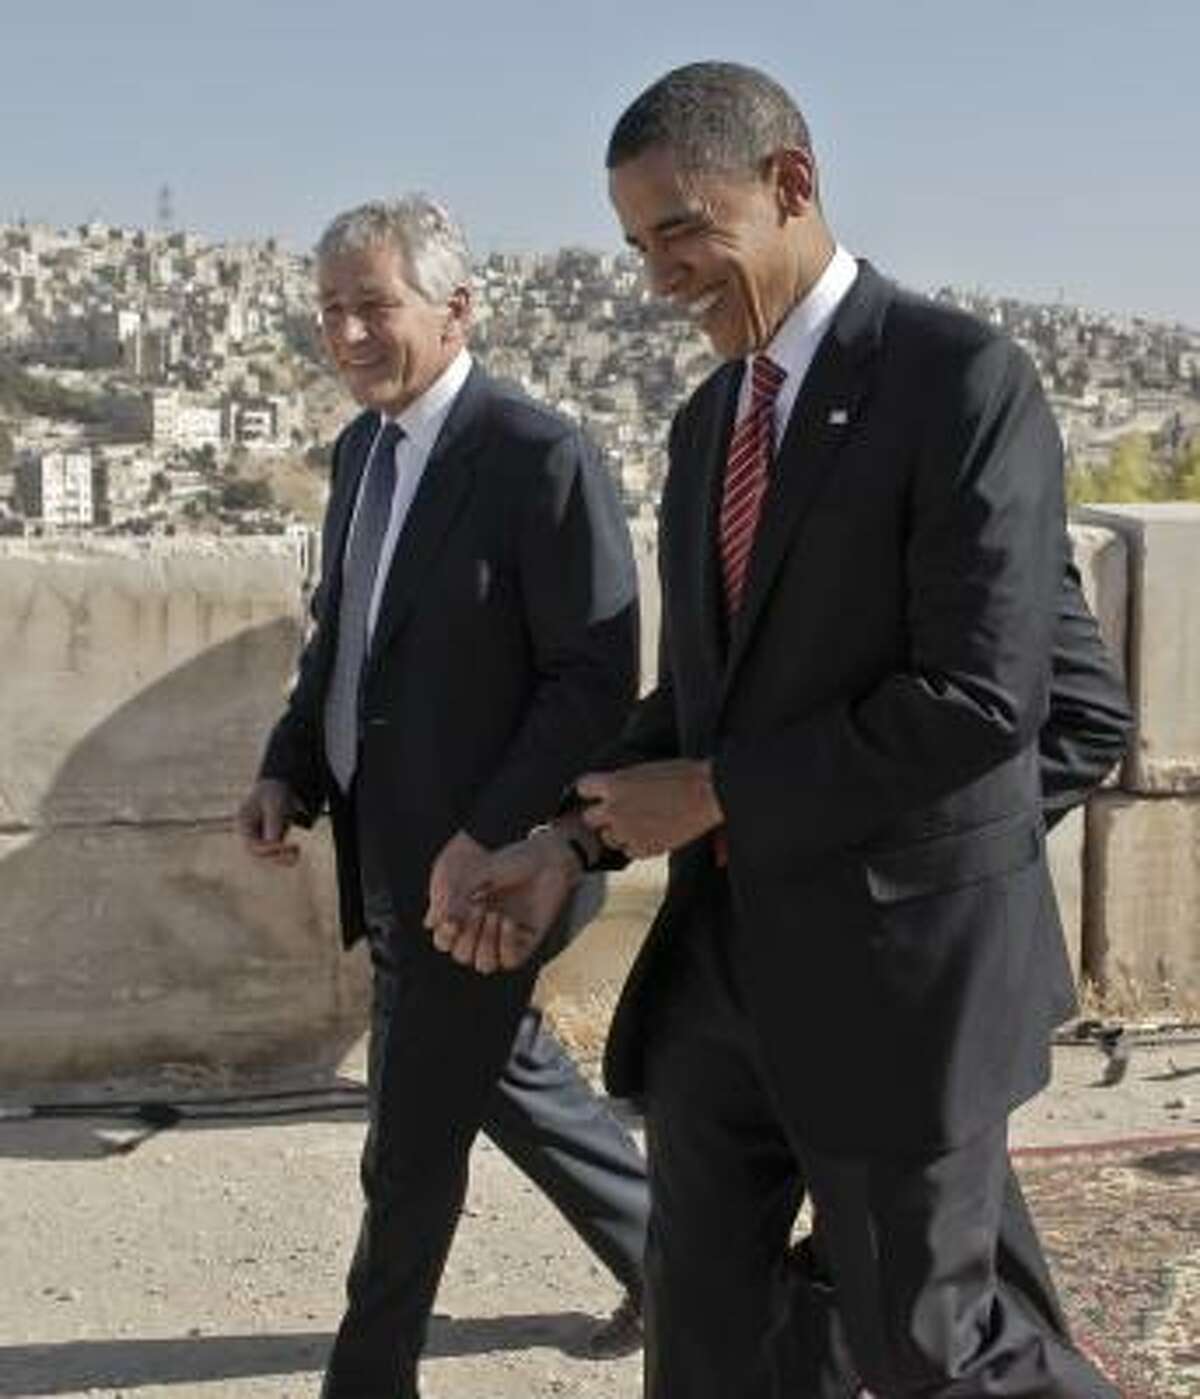 Democratic presidential candidate Sen. Barack Obama, D-Ill., right, walking with Sen. Chuck Hagel, R-Neb., as they tour the citadel in Amman, Jordan, on July 22. Talk of Hagel as a potential running mate for Obama tends to confound partisans in both parties.